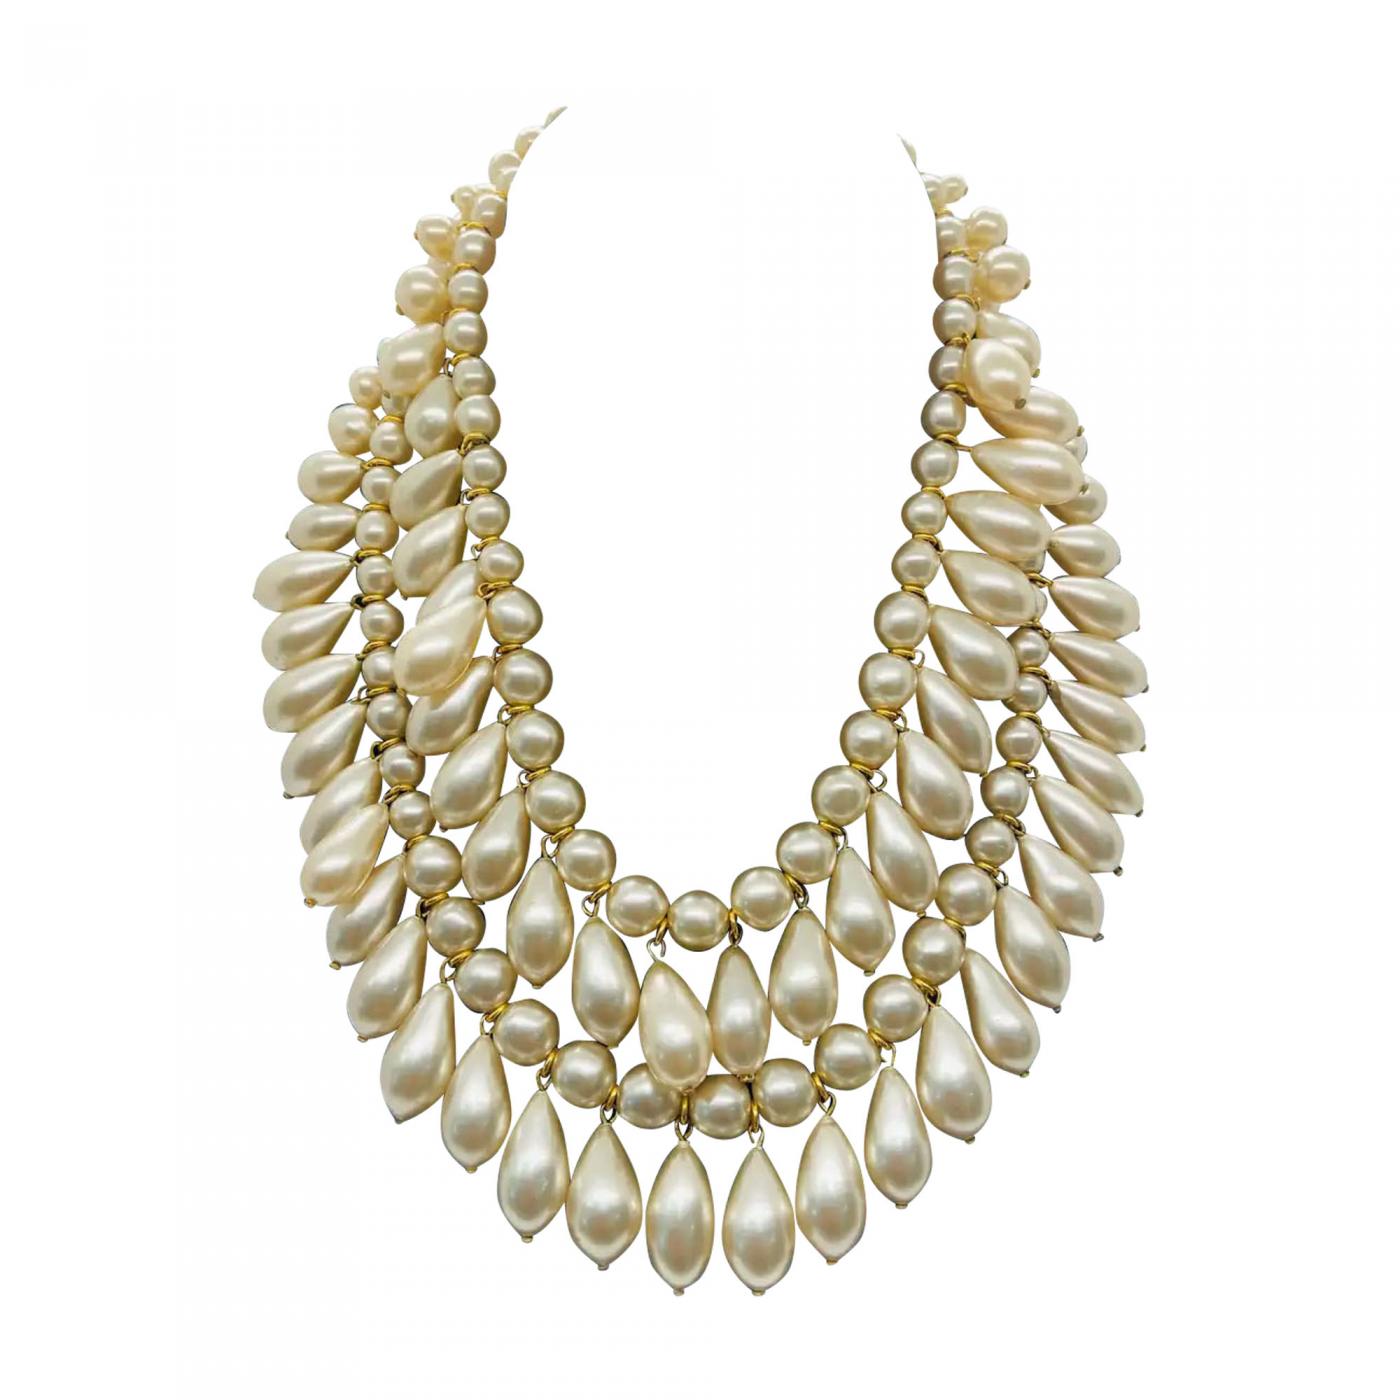 Long Pearl Necklaces for Women White Faux Pearl Strand Layered 